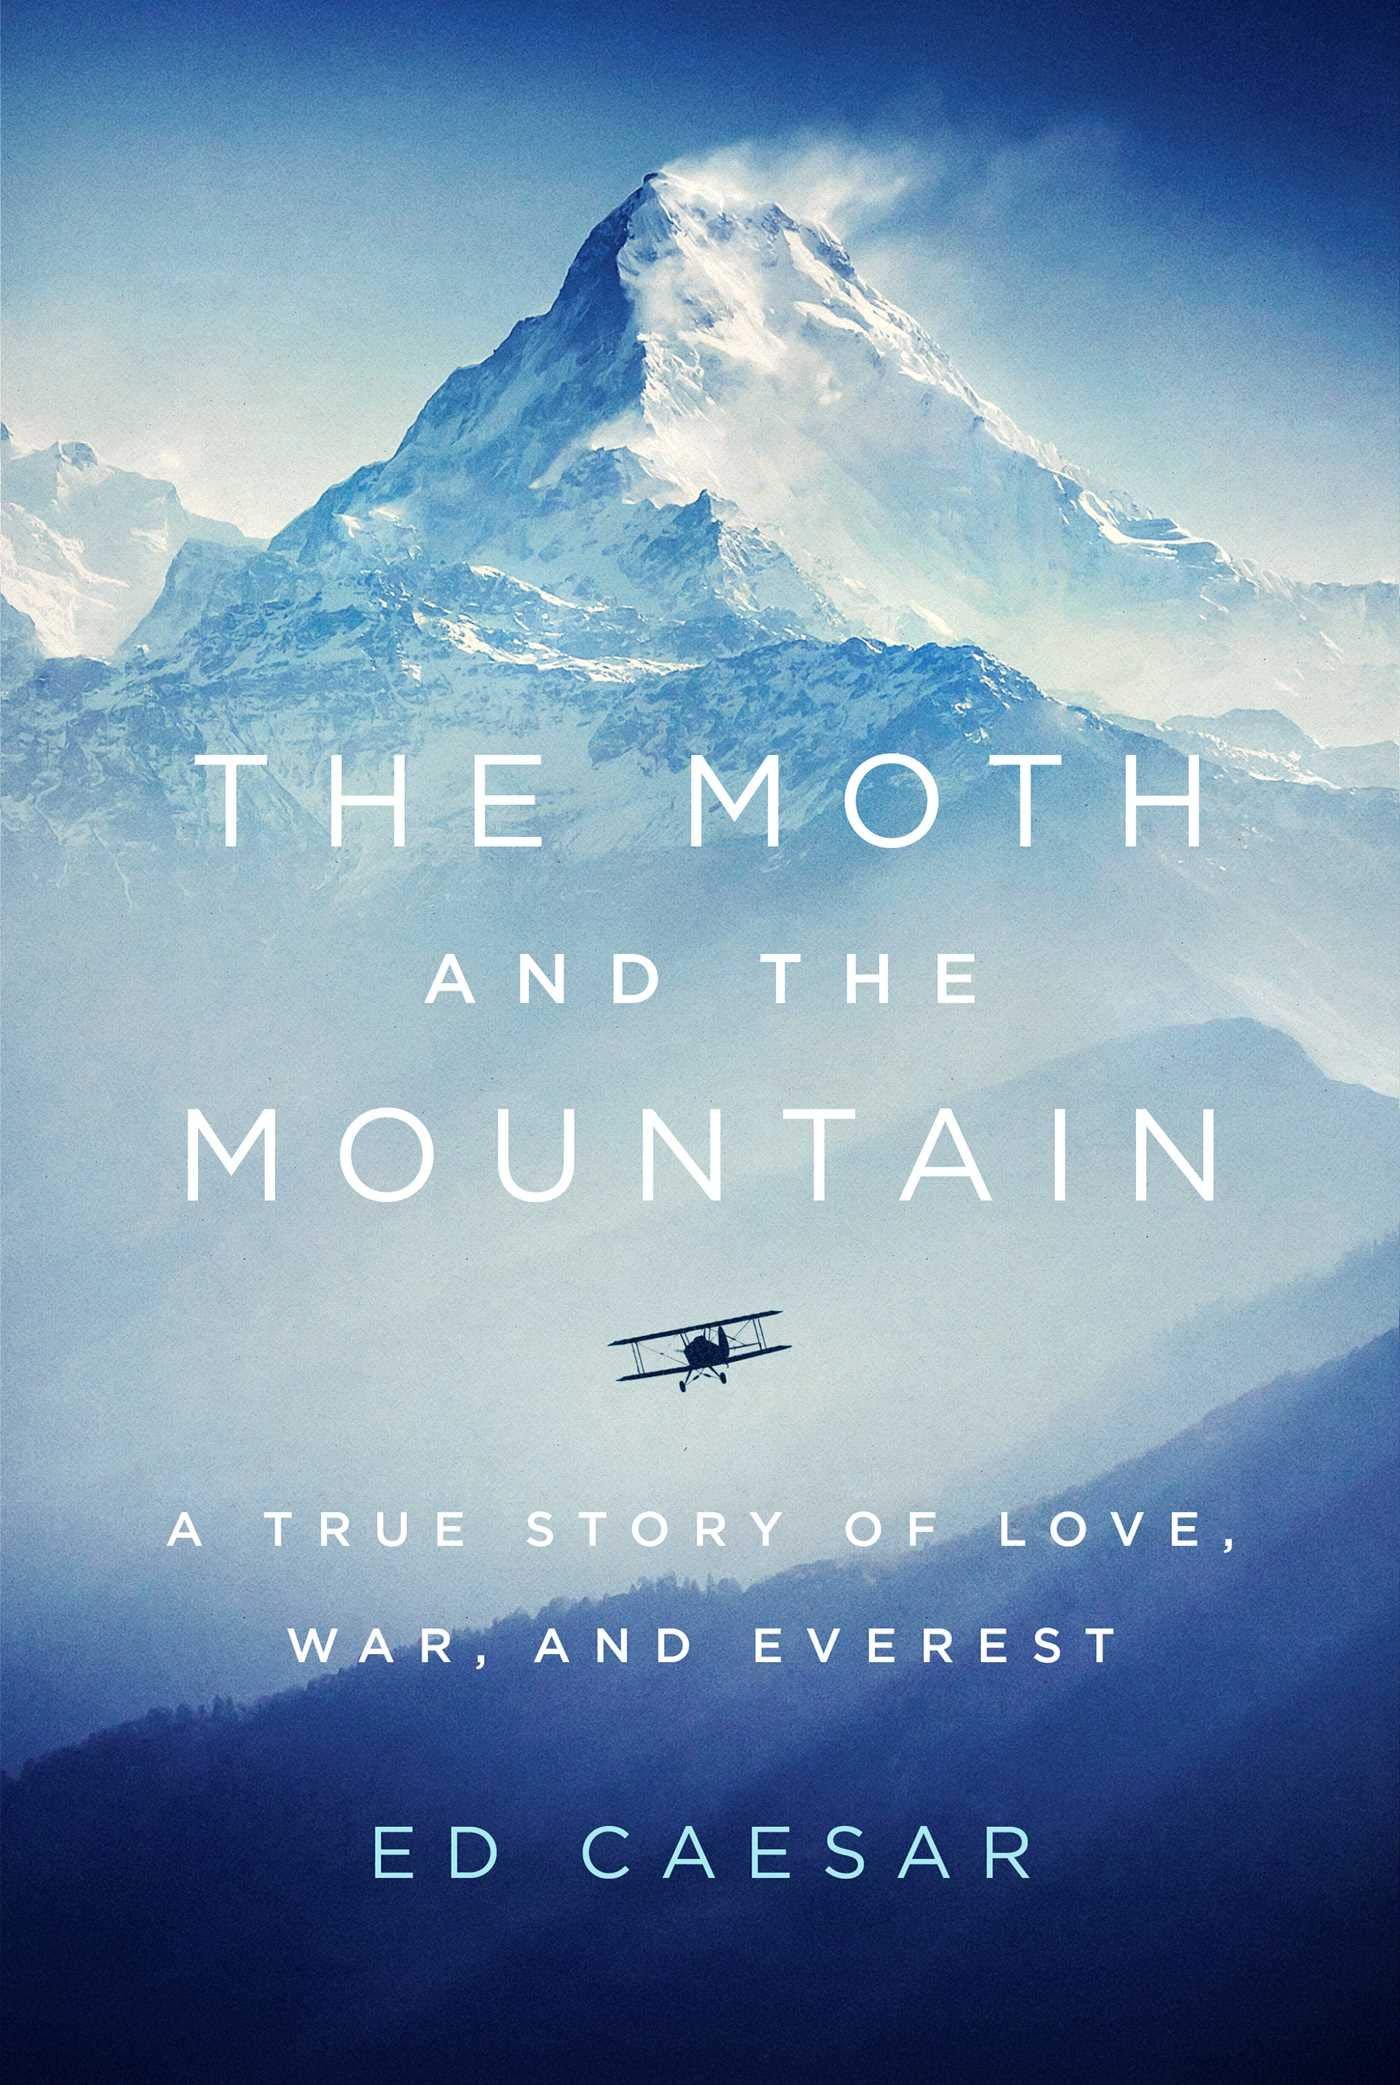 The Moth and the Mountain: A true Story of Love, War and Everest, by Ed Caesar. 